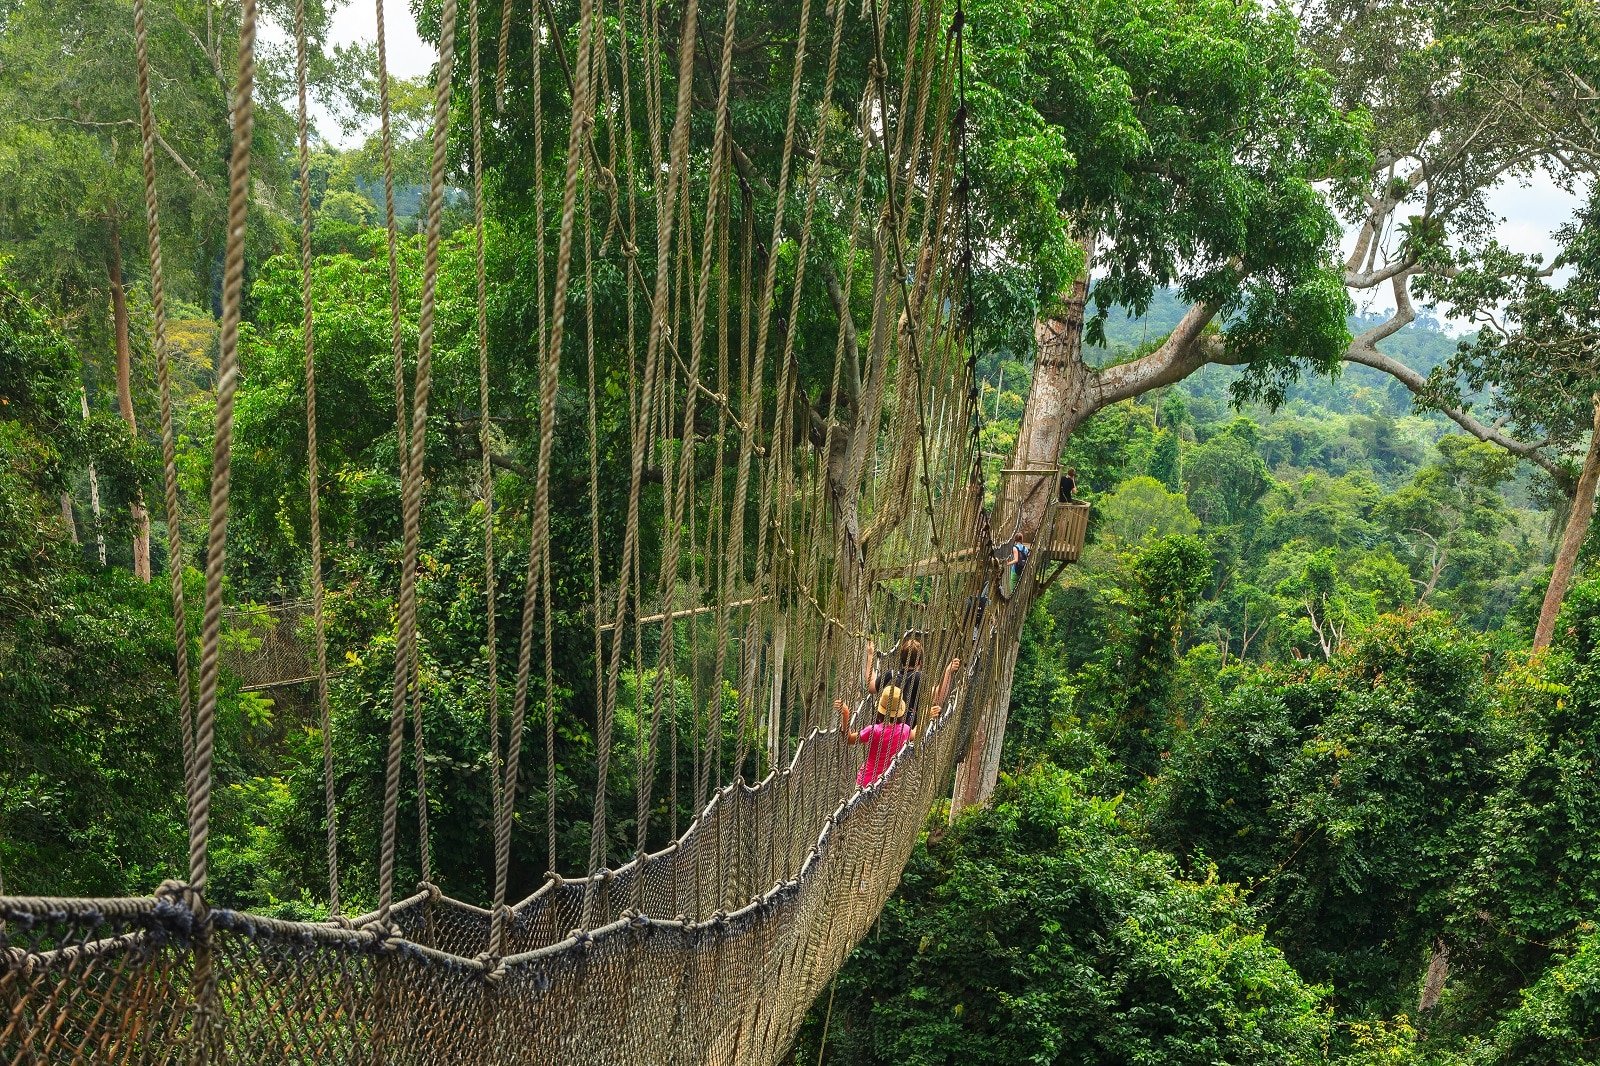 <p><span>In Kakum National Park, Ghana, the canopy walkway offers a rare view of West Africa’s tropical rainforest. This 350-meter-long and 30-meter-high walkway is an exciting way to observe the forest’s diverse ecosystem. The park is home to forest elephants, several primate species, and an abundance of birdlife. The canopy walk is a tourist attraction and an educational platform, providing insight into the importance of rainforest conservation.</span></p> <p><b>Insider’s Tip: </b><span>Visit the park early in the morning for the best wildlife viewing opportunities. </span></p> <p><b>When To Travel: </b><span>The dry season from November to March is the best time to visit. </span></p> <p><b>How To Get There: </b><span>Kakum is about a 3-hour drive from Accra, Ghana’s capital.</span></p>